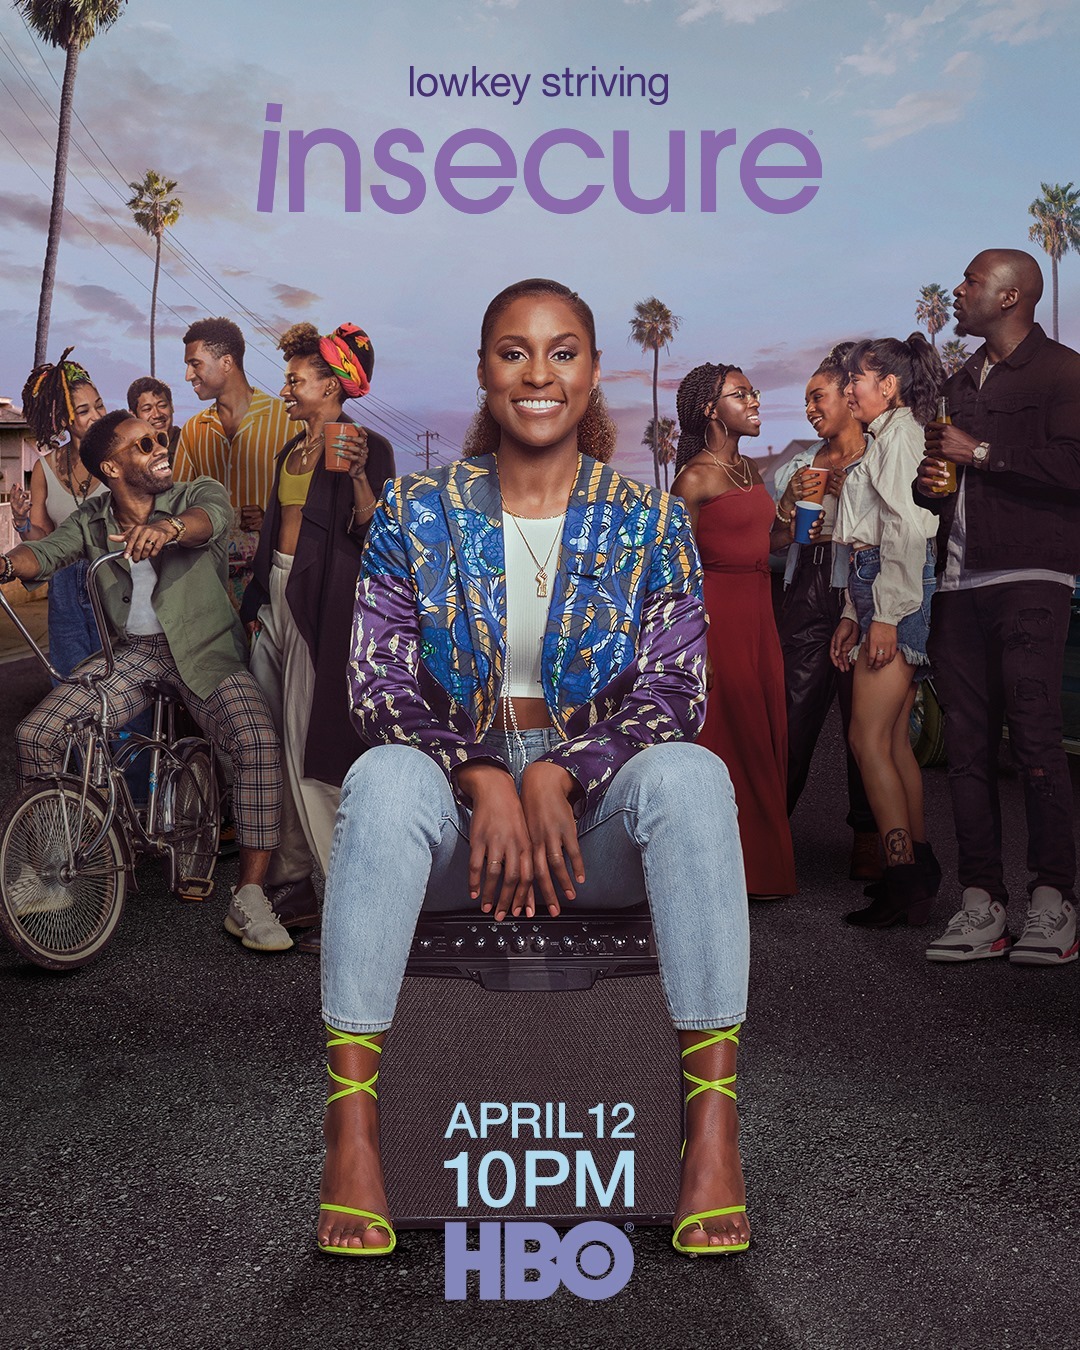 Extra Large TV Poster Image for Insecure (#4 of 5)